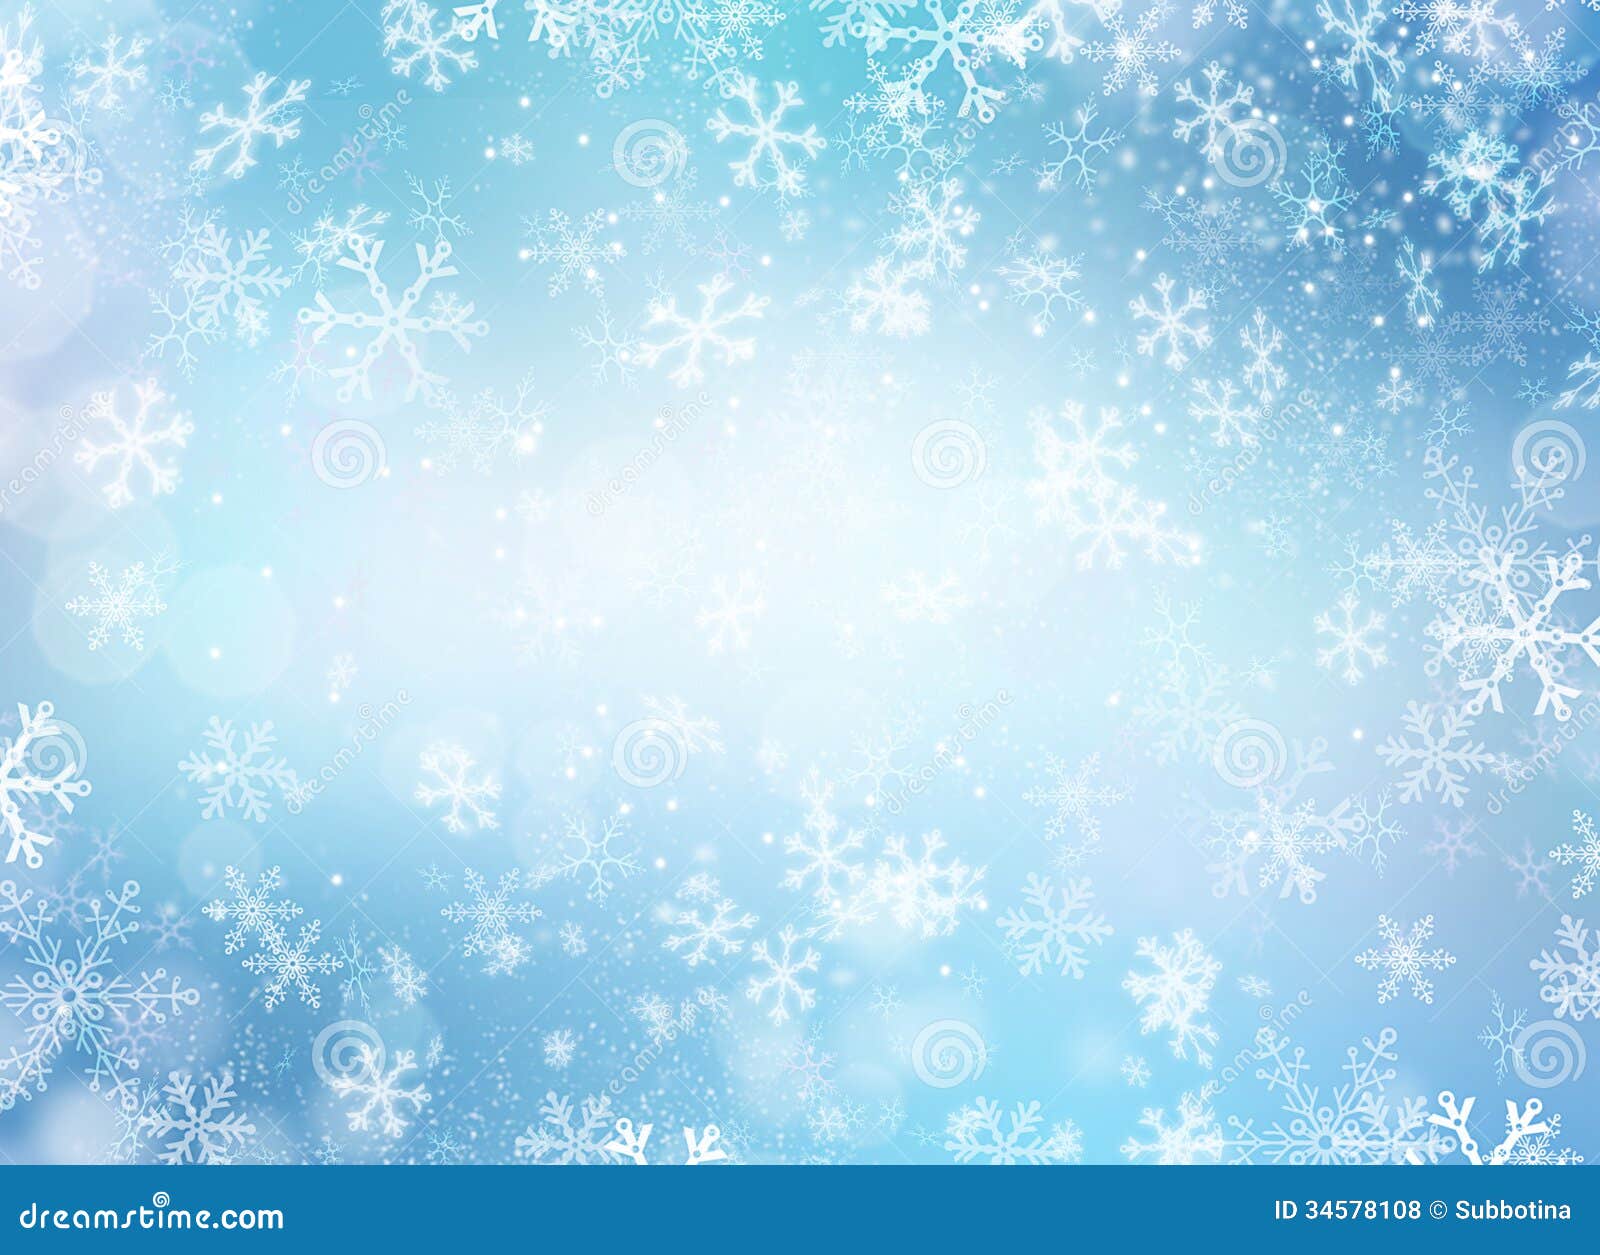 snow background clipart - photo #47